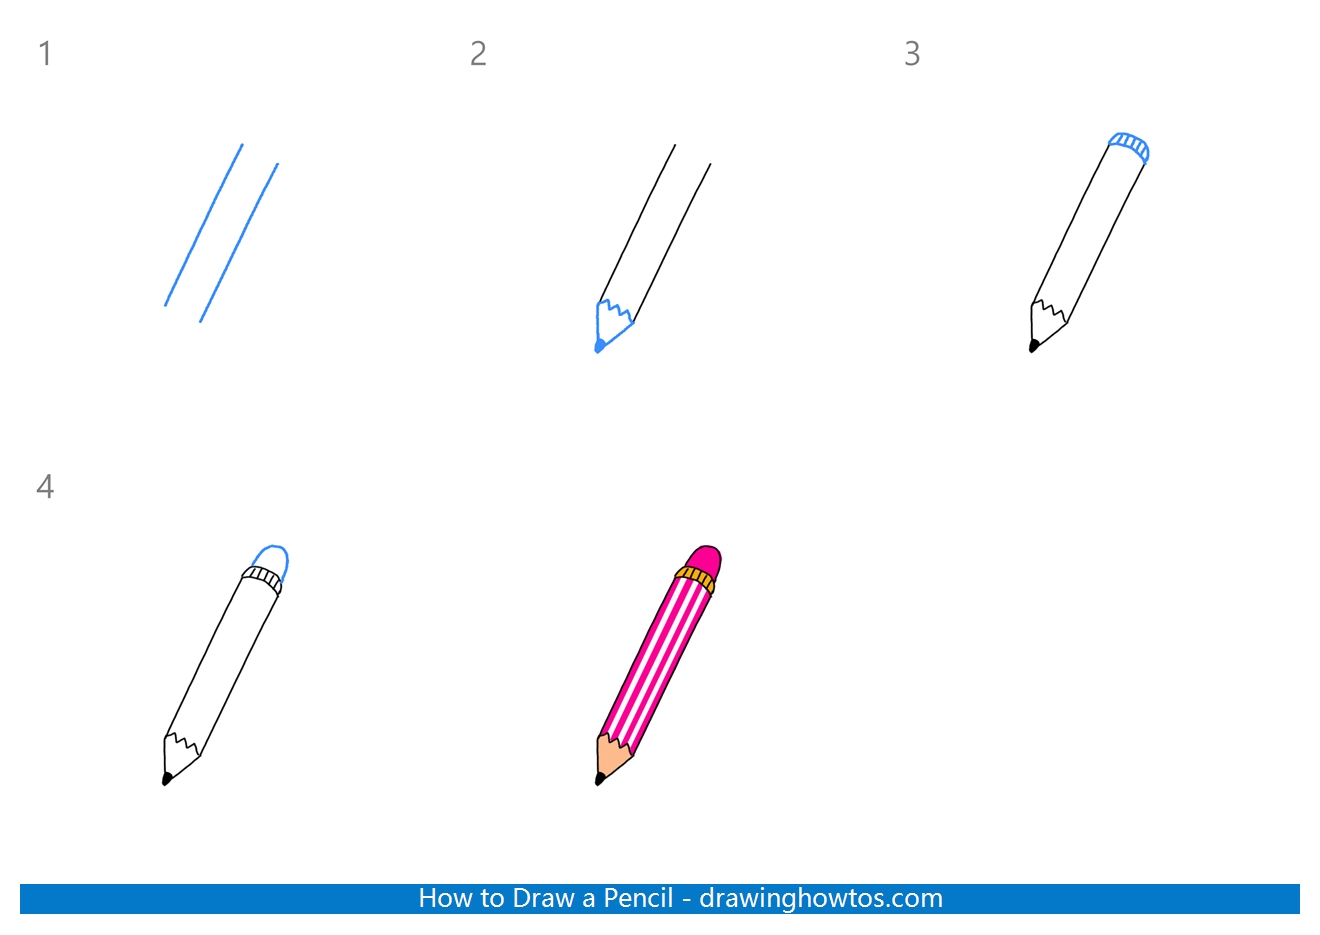 How to Draw a Pencil Step by Step